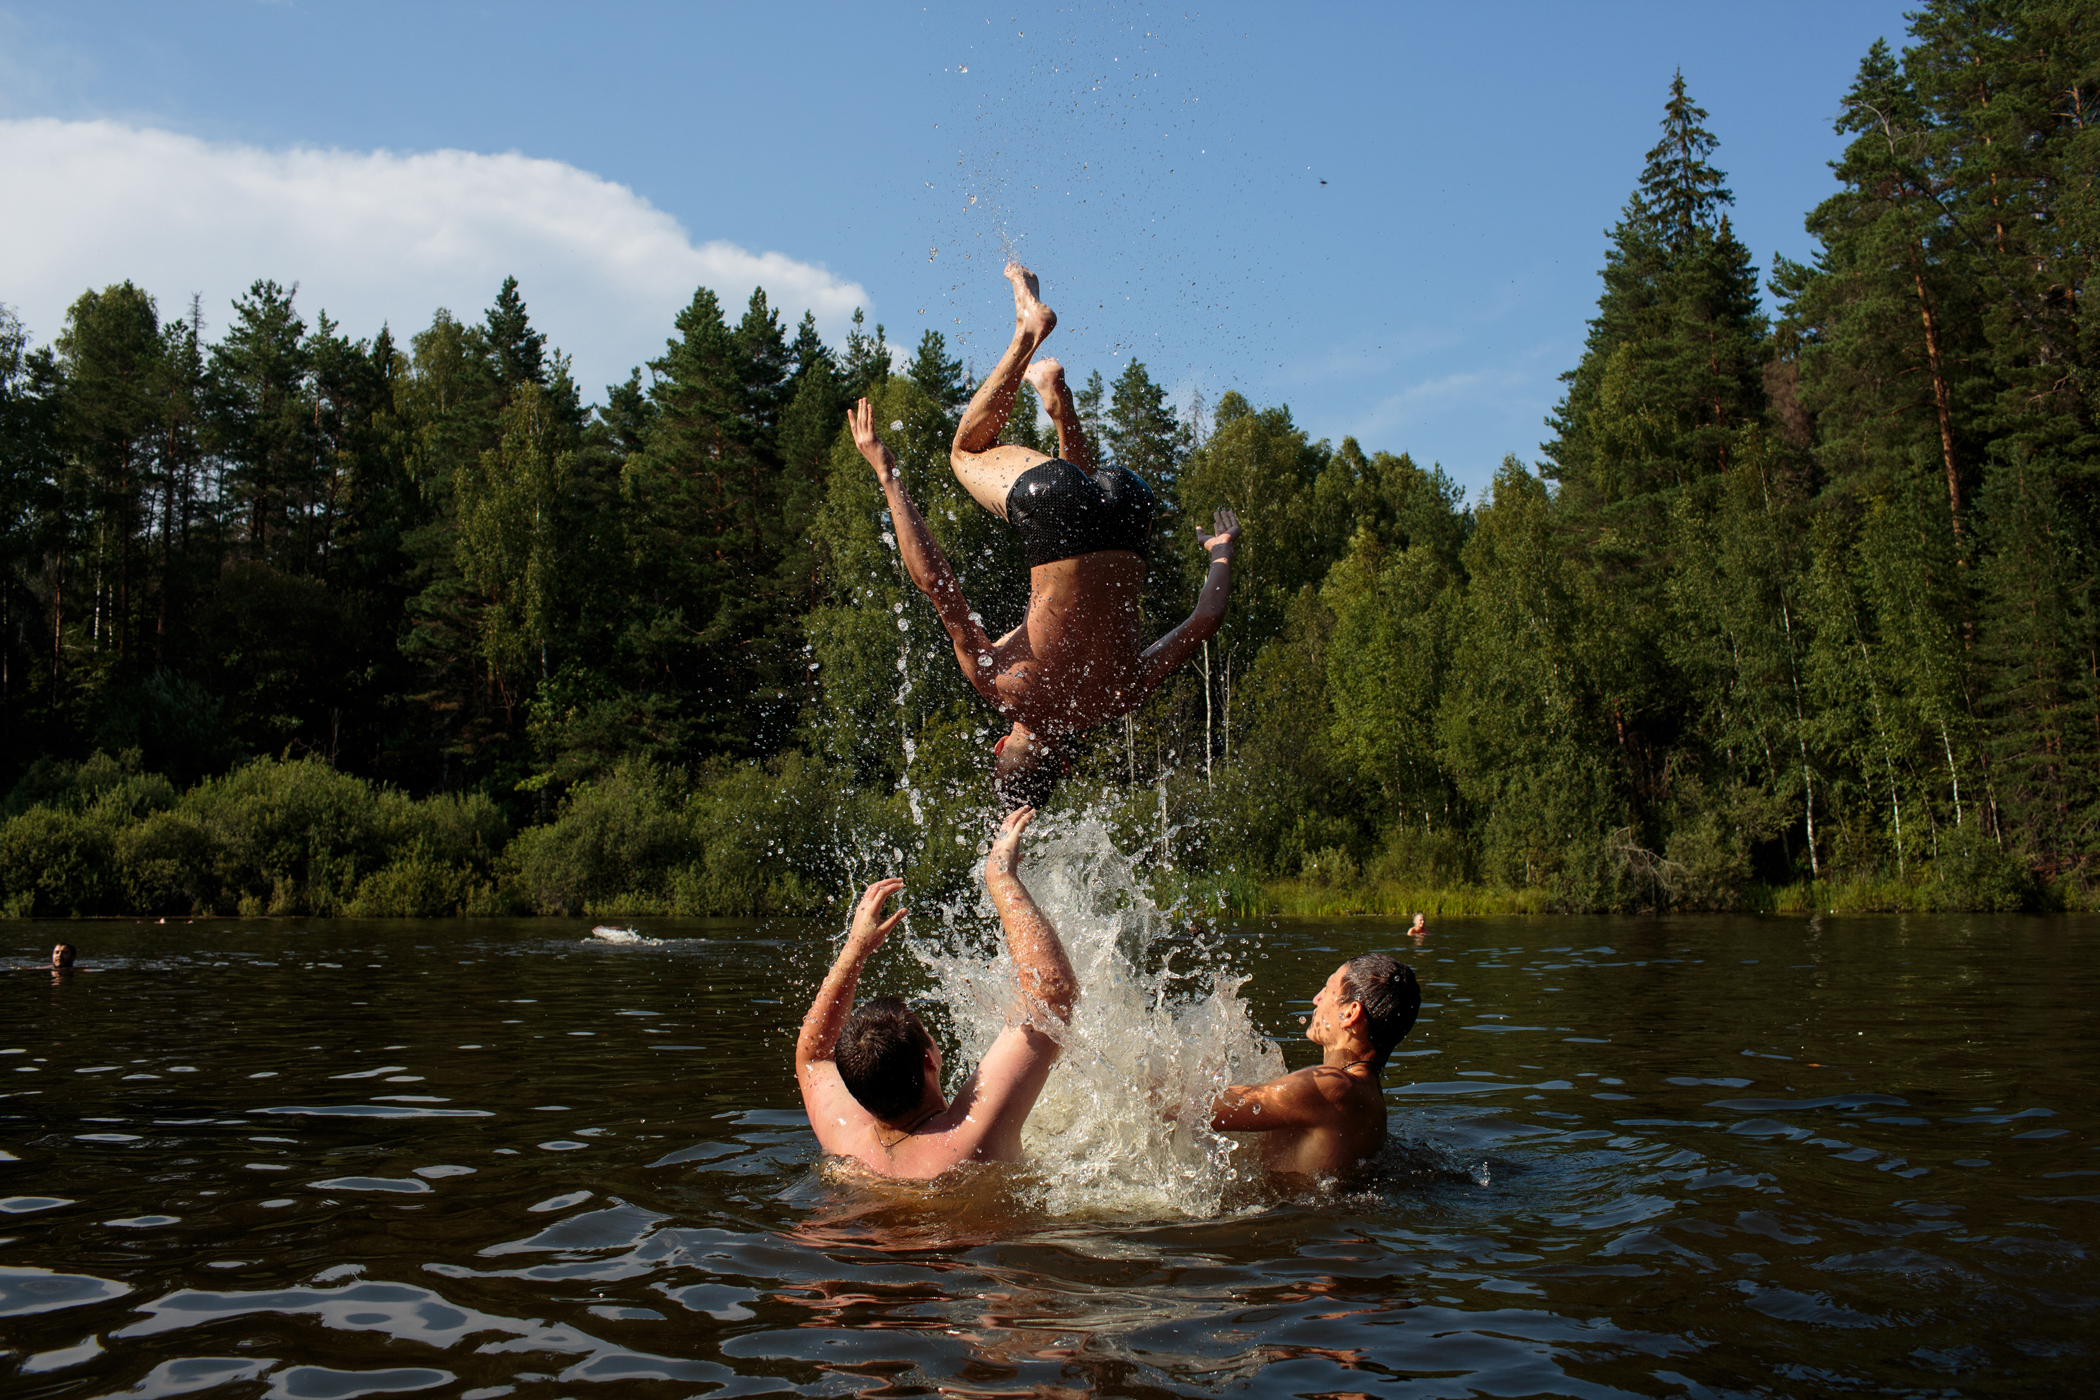 A camp group from Stavropol plays in the lake during an afternoon off at "Orthodox Warrior" camp, which takes place in Diveevo, the center of pilgrimage for Orthodox Christians